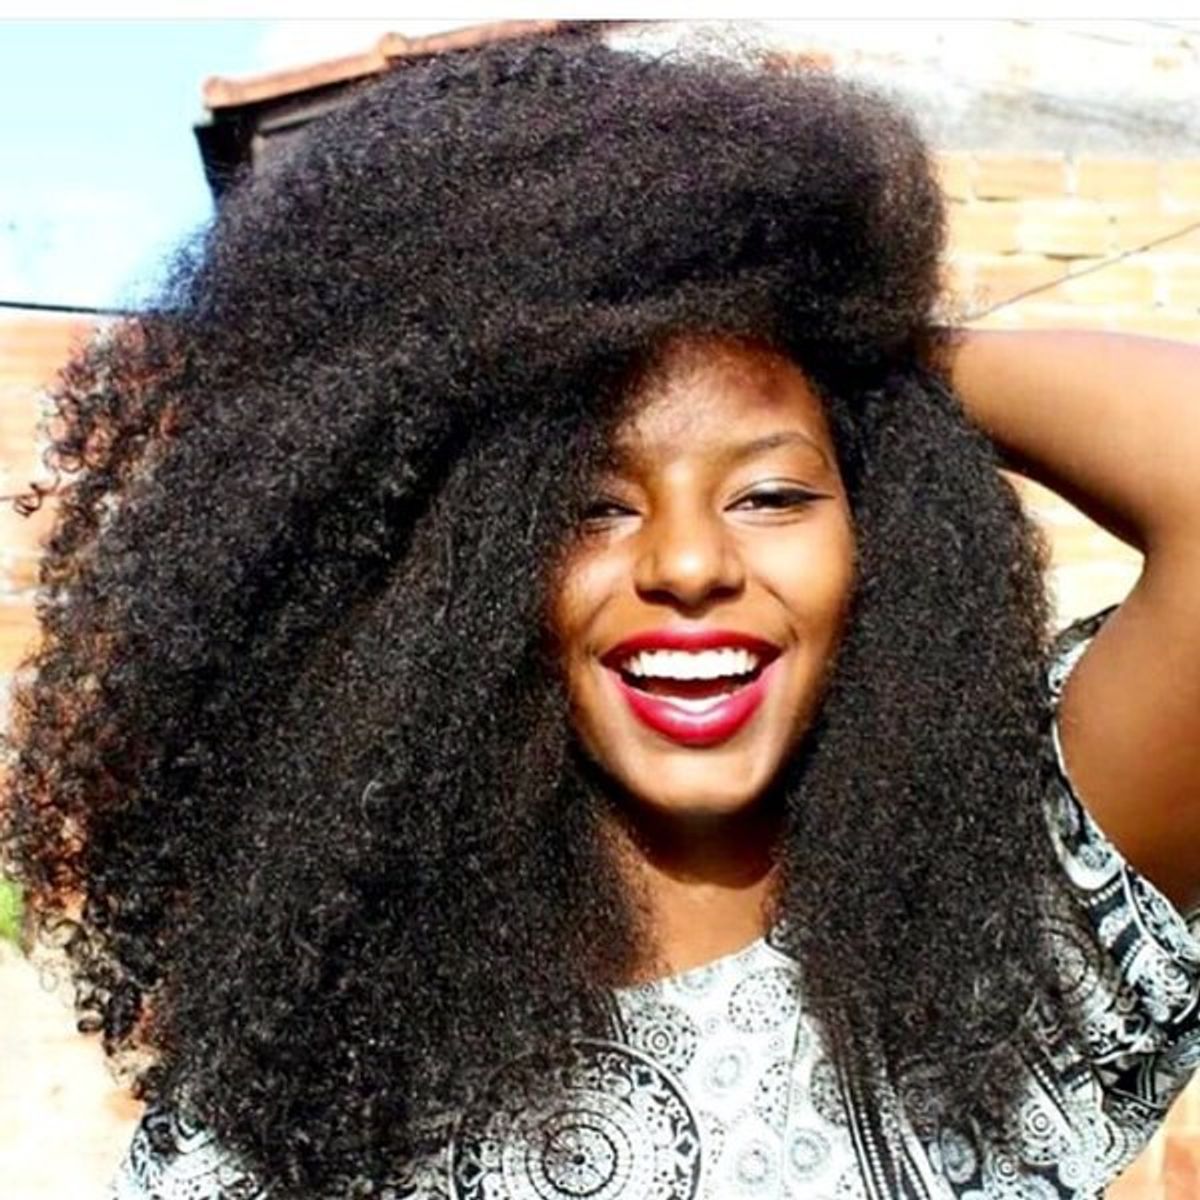 5 Tips for Keeping Up Crochet Braids